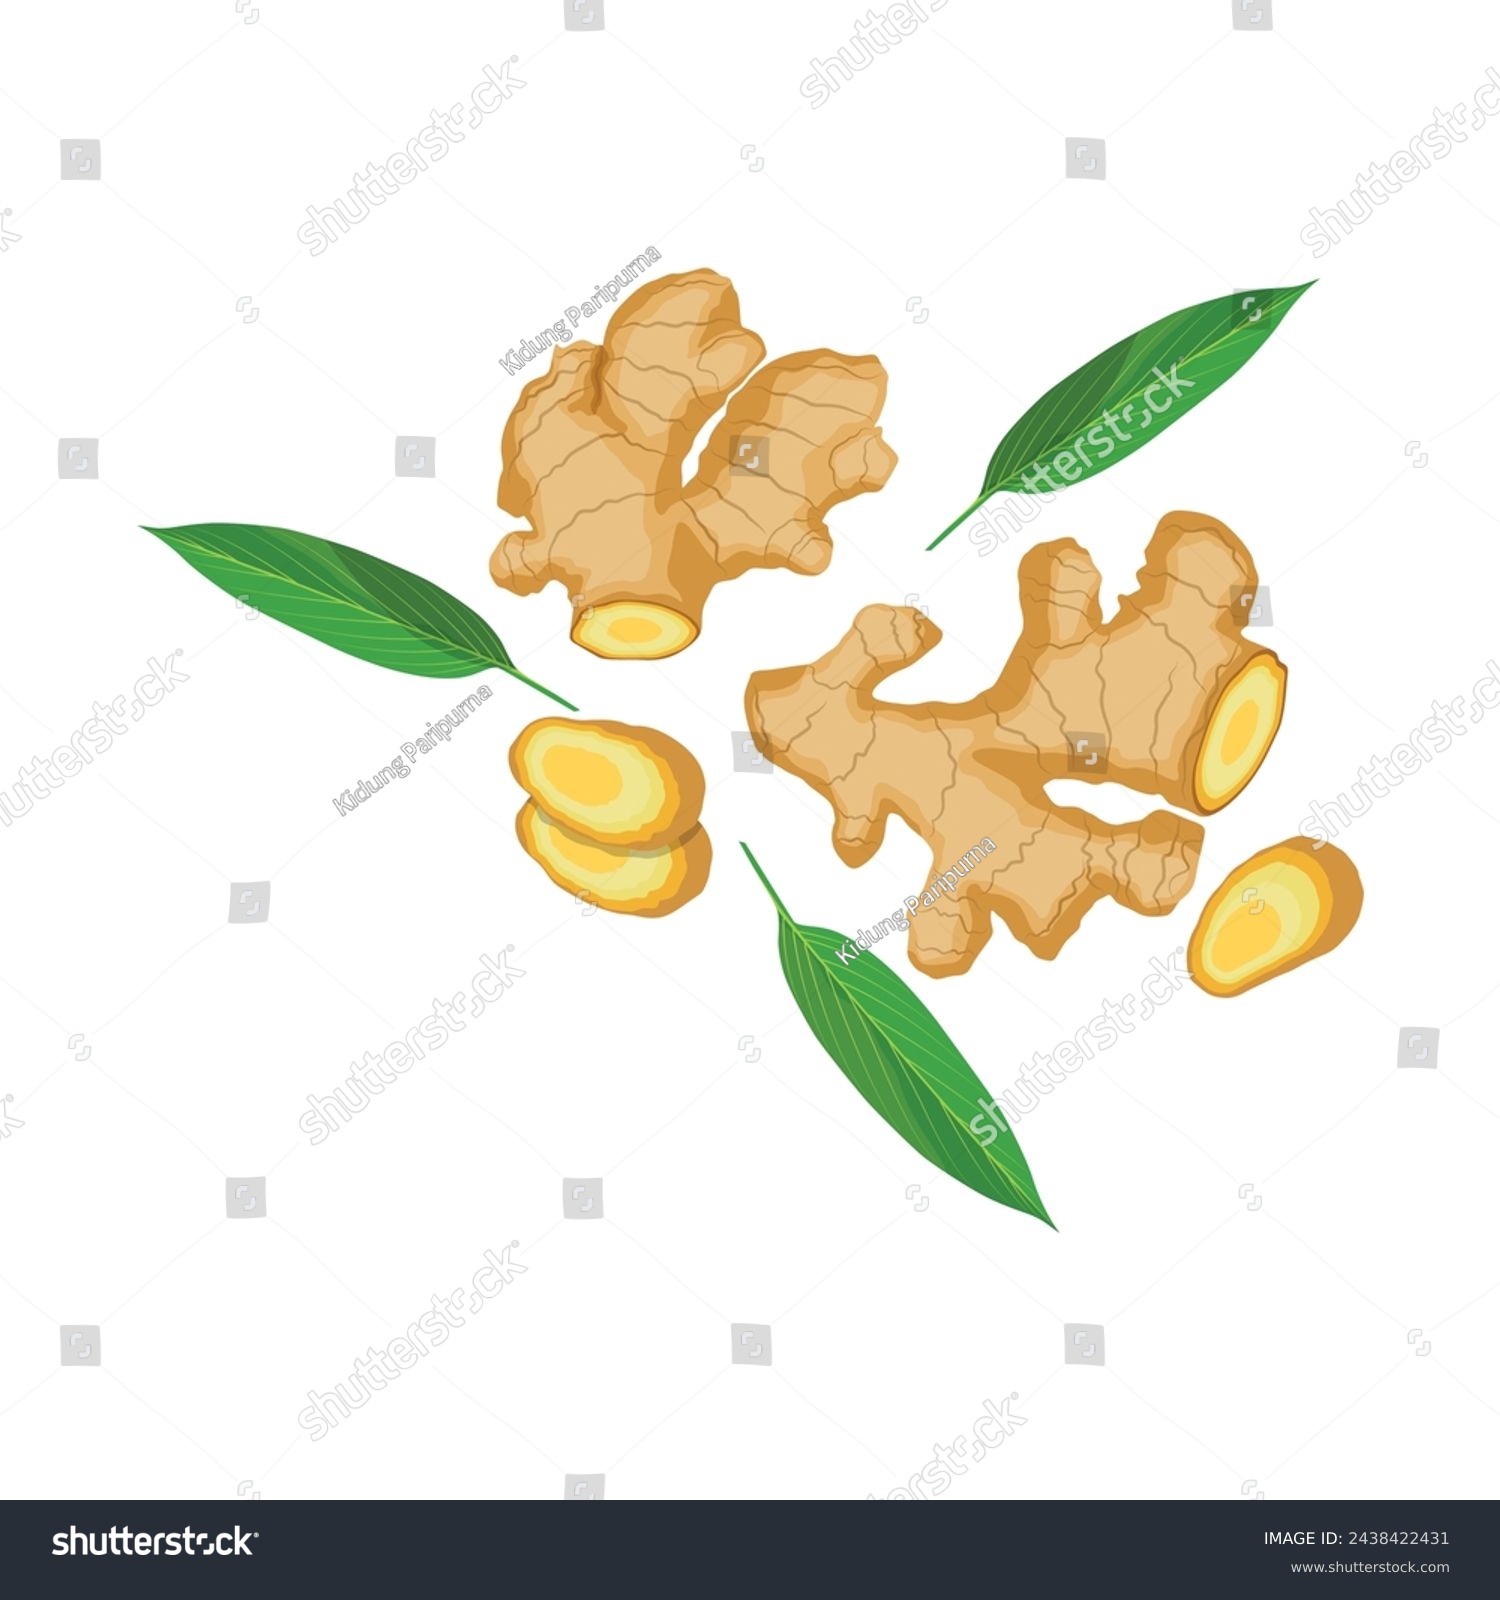 Vector illustration set of ginger root in cartoon flat style. Ginger rootcollection set. Artistic style colorful aromatic. Herbal spice. Detox food ingredient, natural herb plant, whole, sliced #2438422431